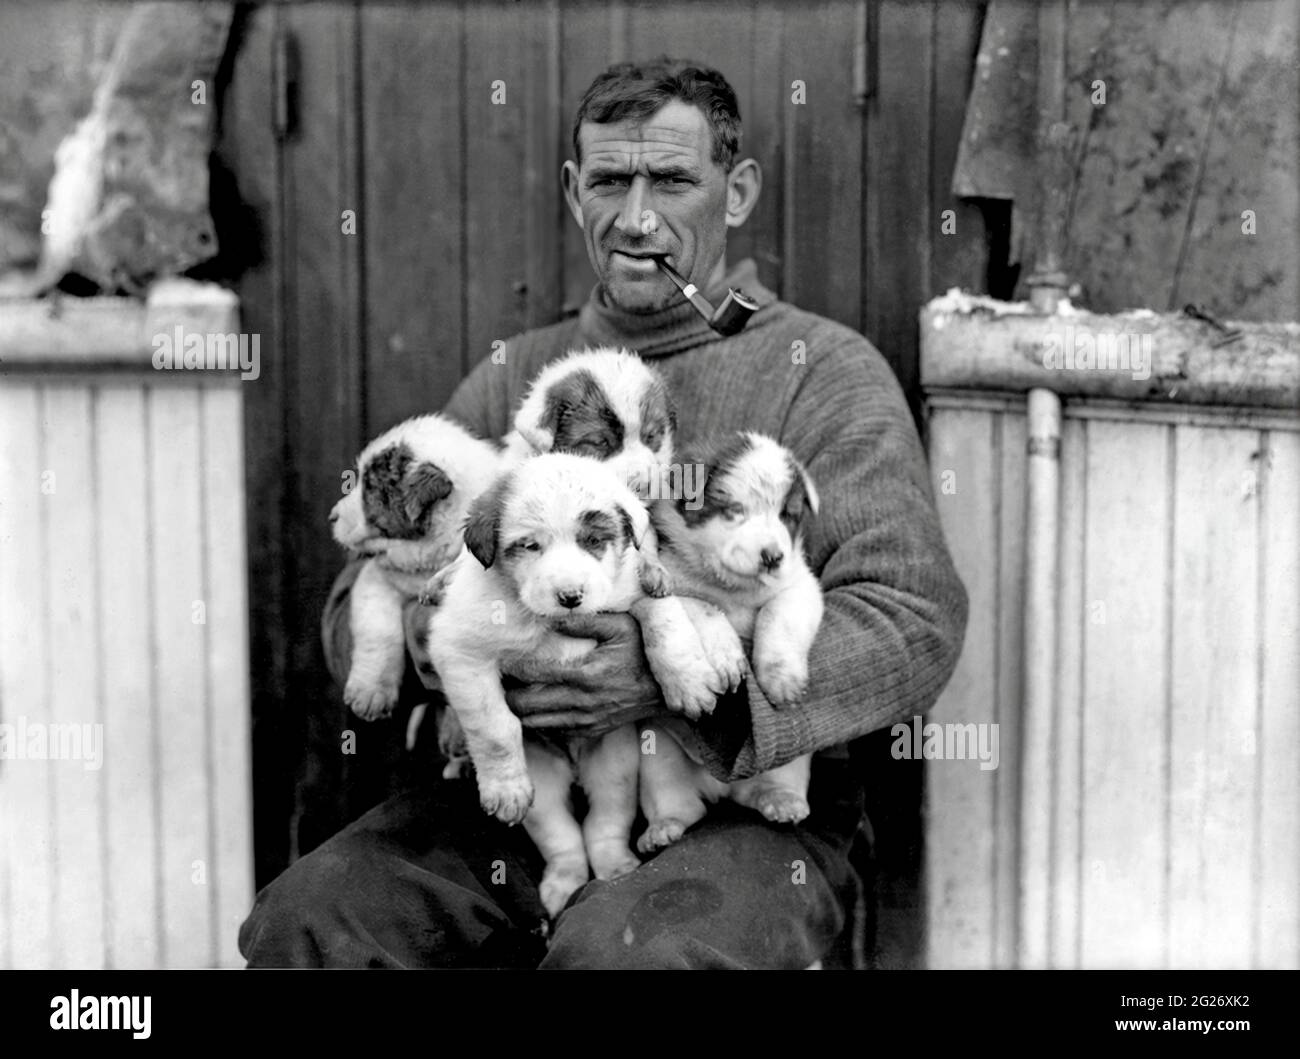 1915 , march, ANTARCTICA , SOUTH POLE : The irish seaman and Antarctic explorer TOM CREAN ( 1877 - 1938 ) with sleigh pups dogs named Roger , Nell , Toby and Nelson , image taken during the Ernest SHACKLETON EXPEDITION of 1914 - 1916 .  Photo by Frank Hurley , National Library of Australia . - IRLANDA - irlandese - ESPLORATION - EXPLORATIONS - ESPLORAZIONE ANTARTIDE  - South Pole - POLO SUD - ESPLORATORE - MINERALOGY - MINERALOGIA - GEOLOGO - GEOLOGY - GEOLOGIA - ritratto - portrait - pipa - pipe - fumatore - smoker - fumo - smoke - cane - cani da slitta - cucciolo - cuccioli - animale domesti Stock Photo